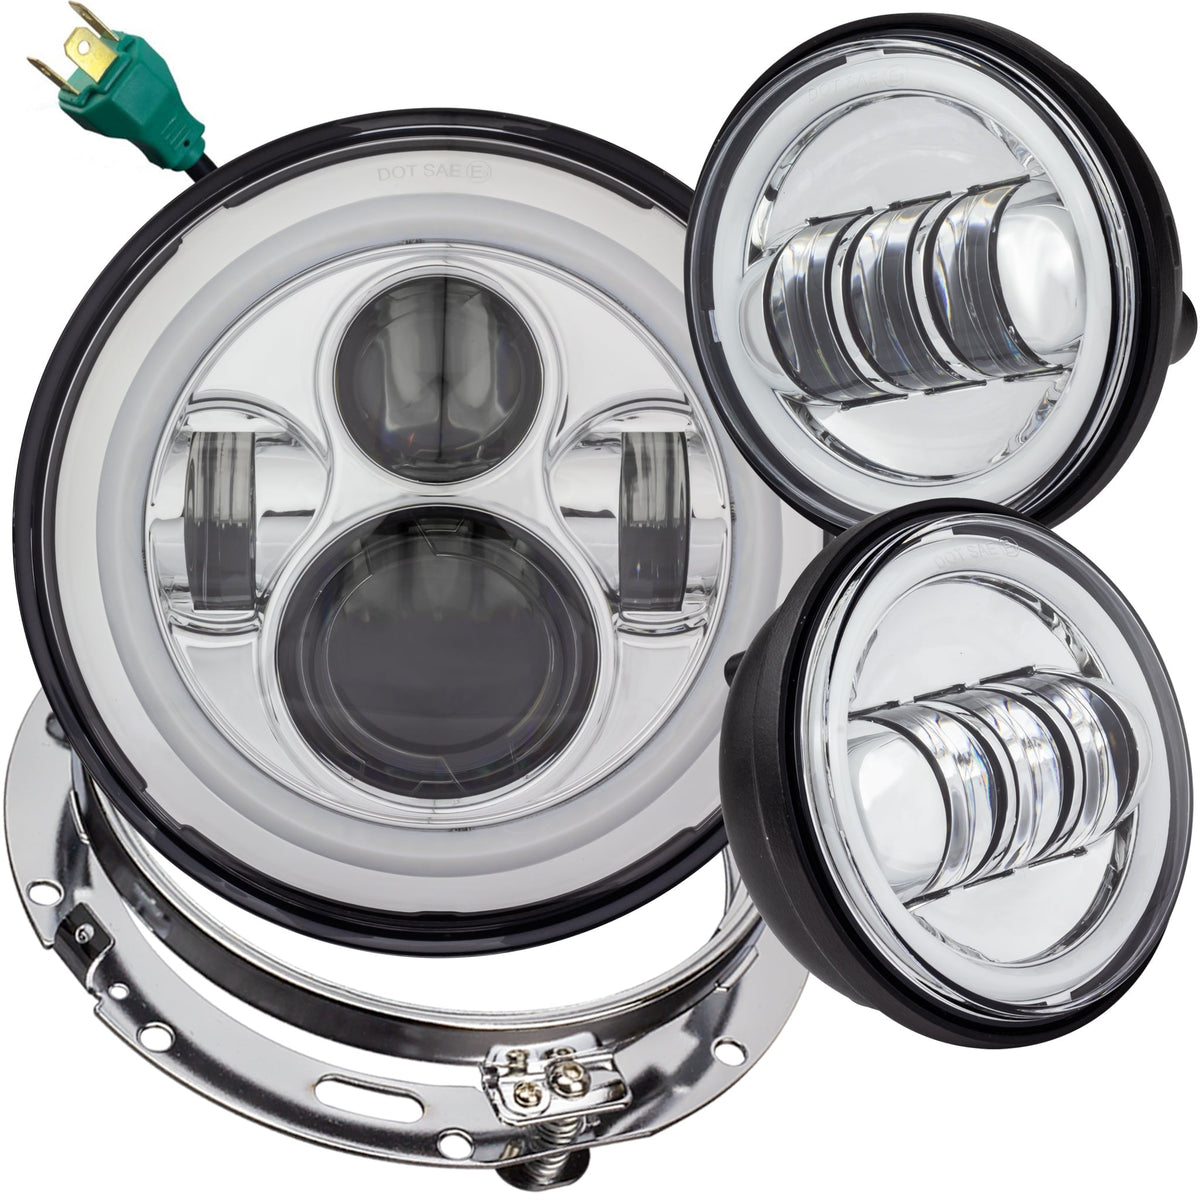 Eagle Lights 7" LED Headlight and 4.5" LED Passing Light Kit with Halo Rings for Harley Davidson and Indian Motorcycles - Generation I / Chrome